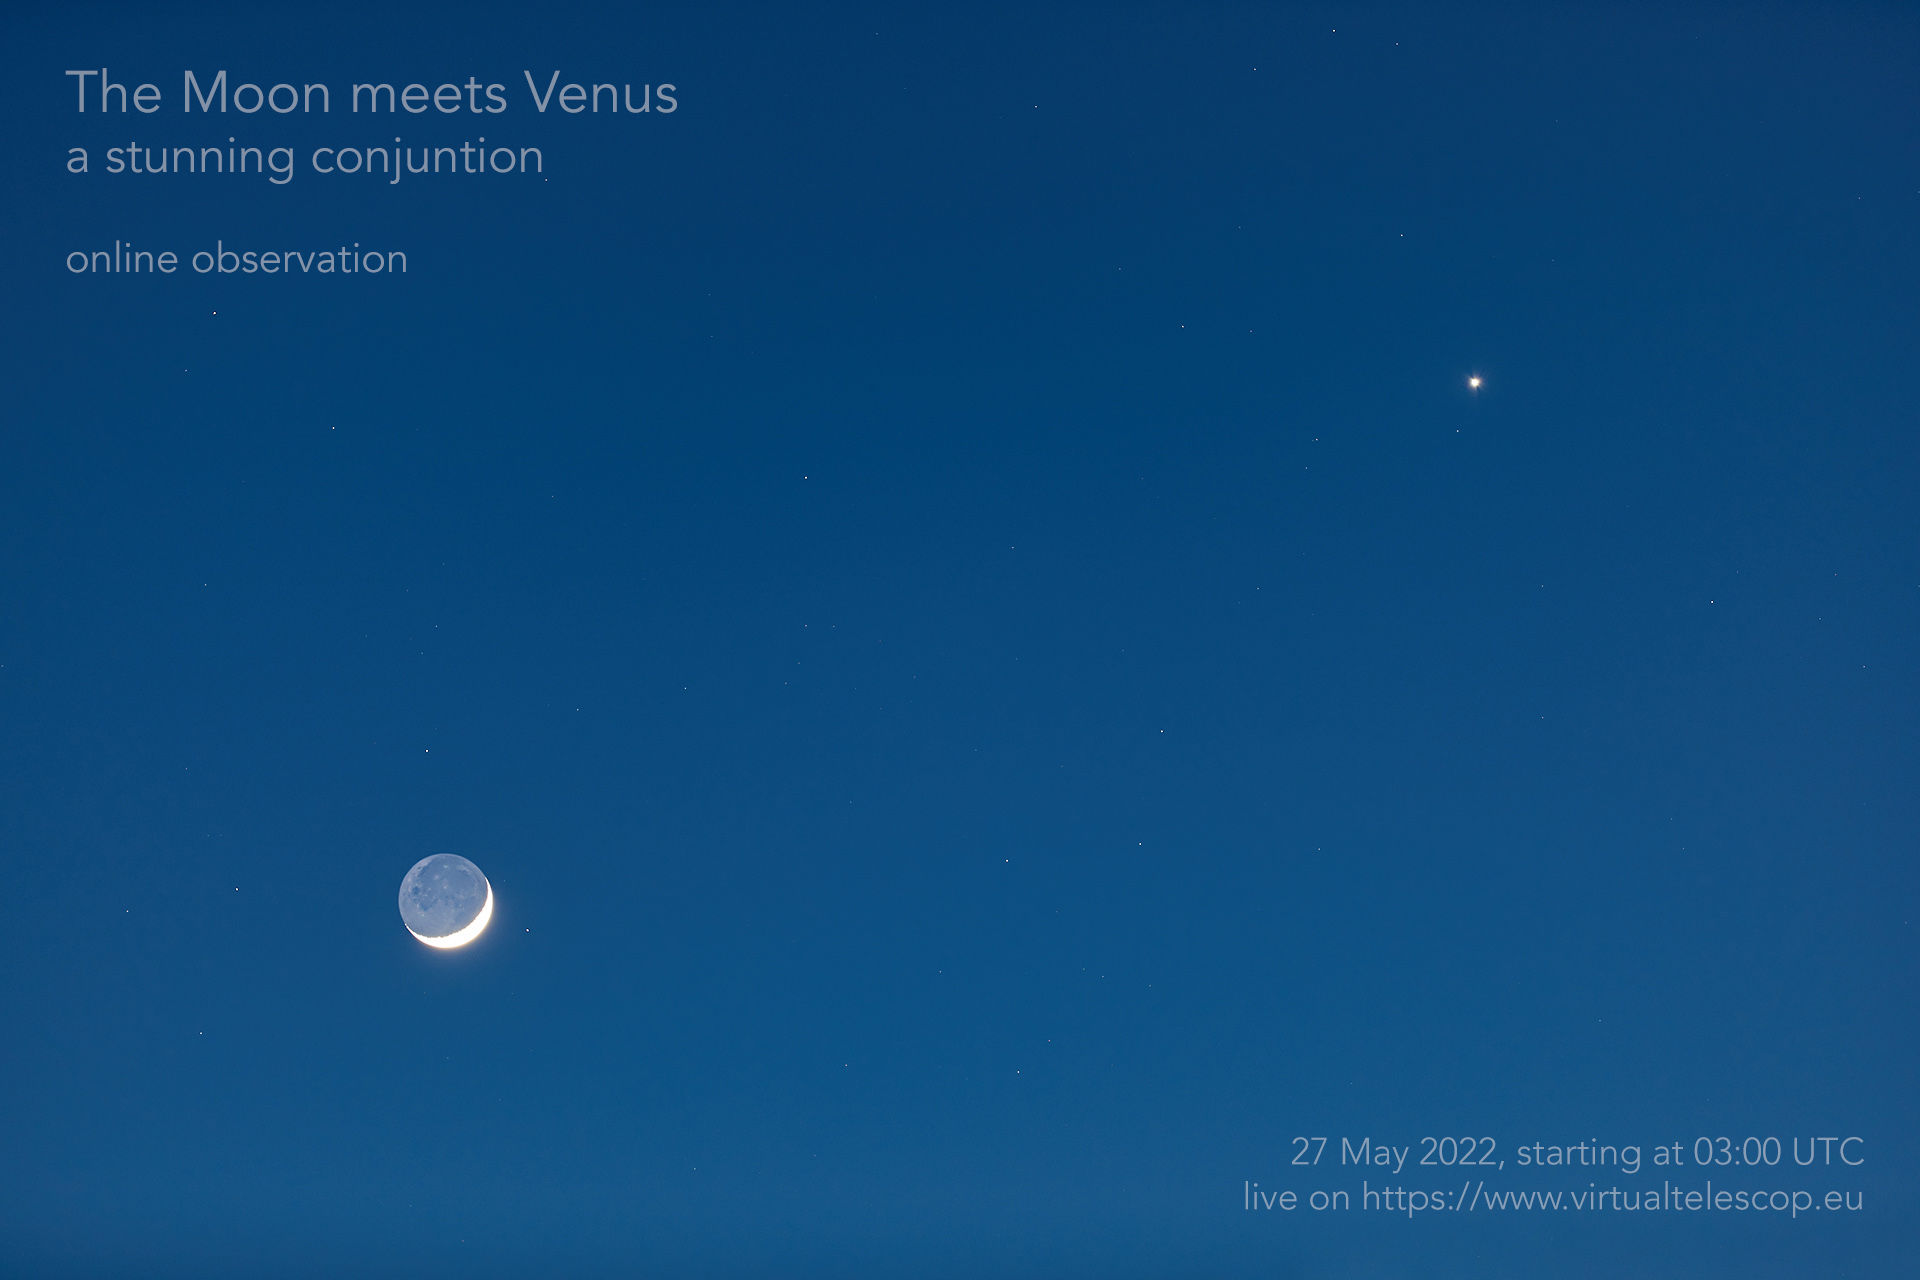 “The Moon meets Venus, a stunning conjunction" - poster of the event.